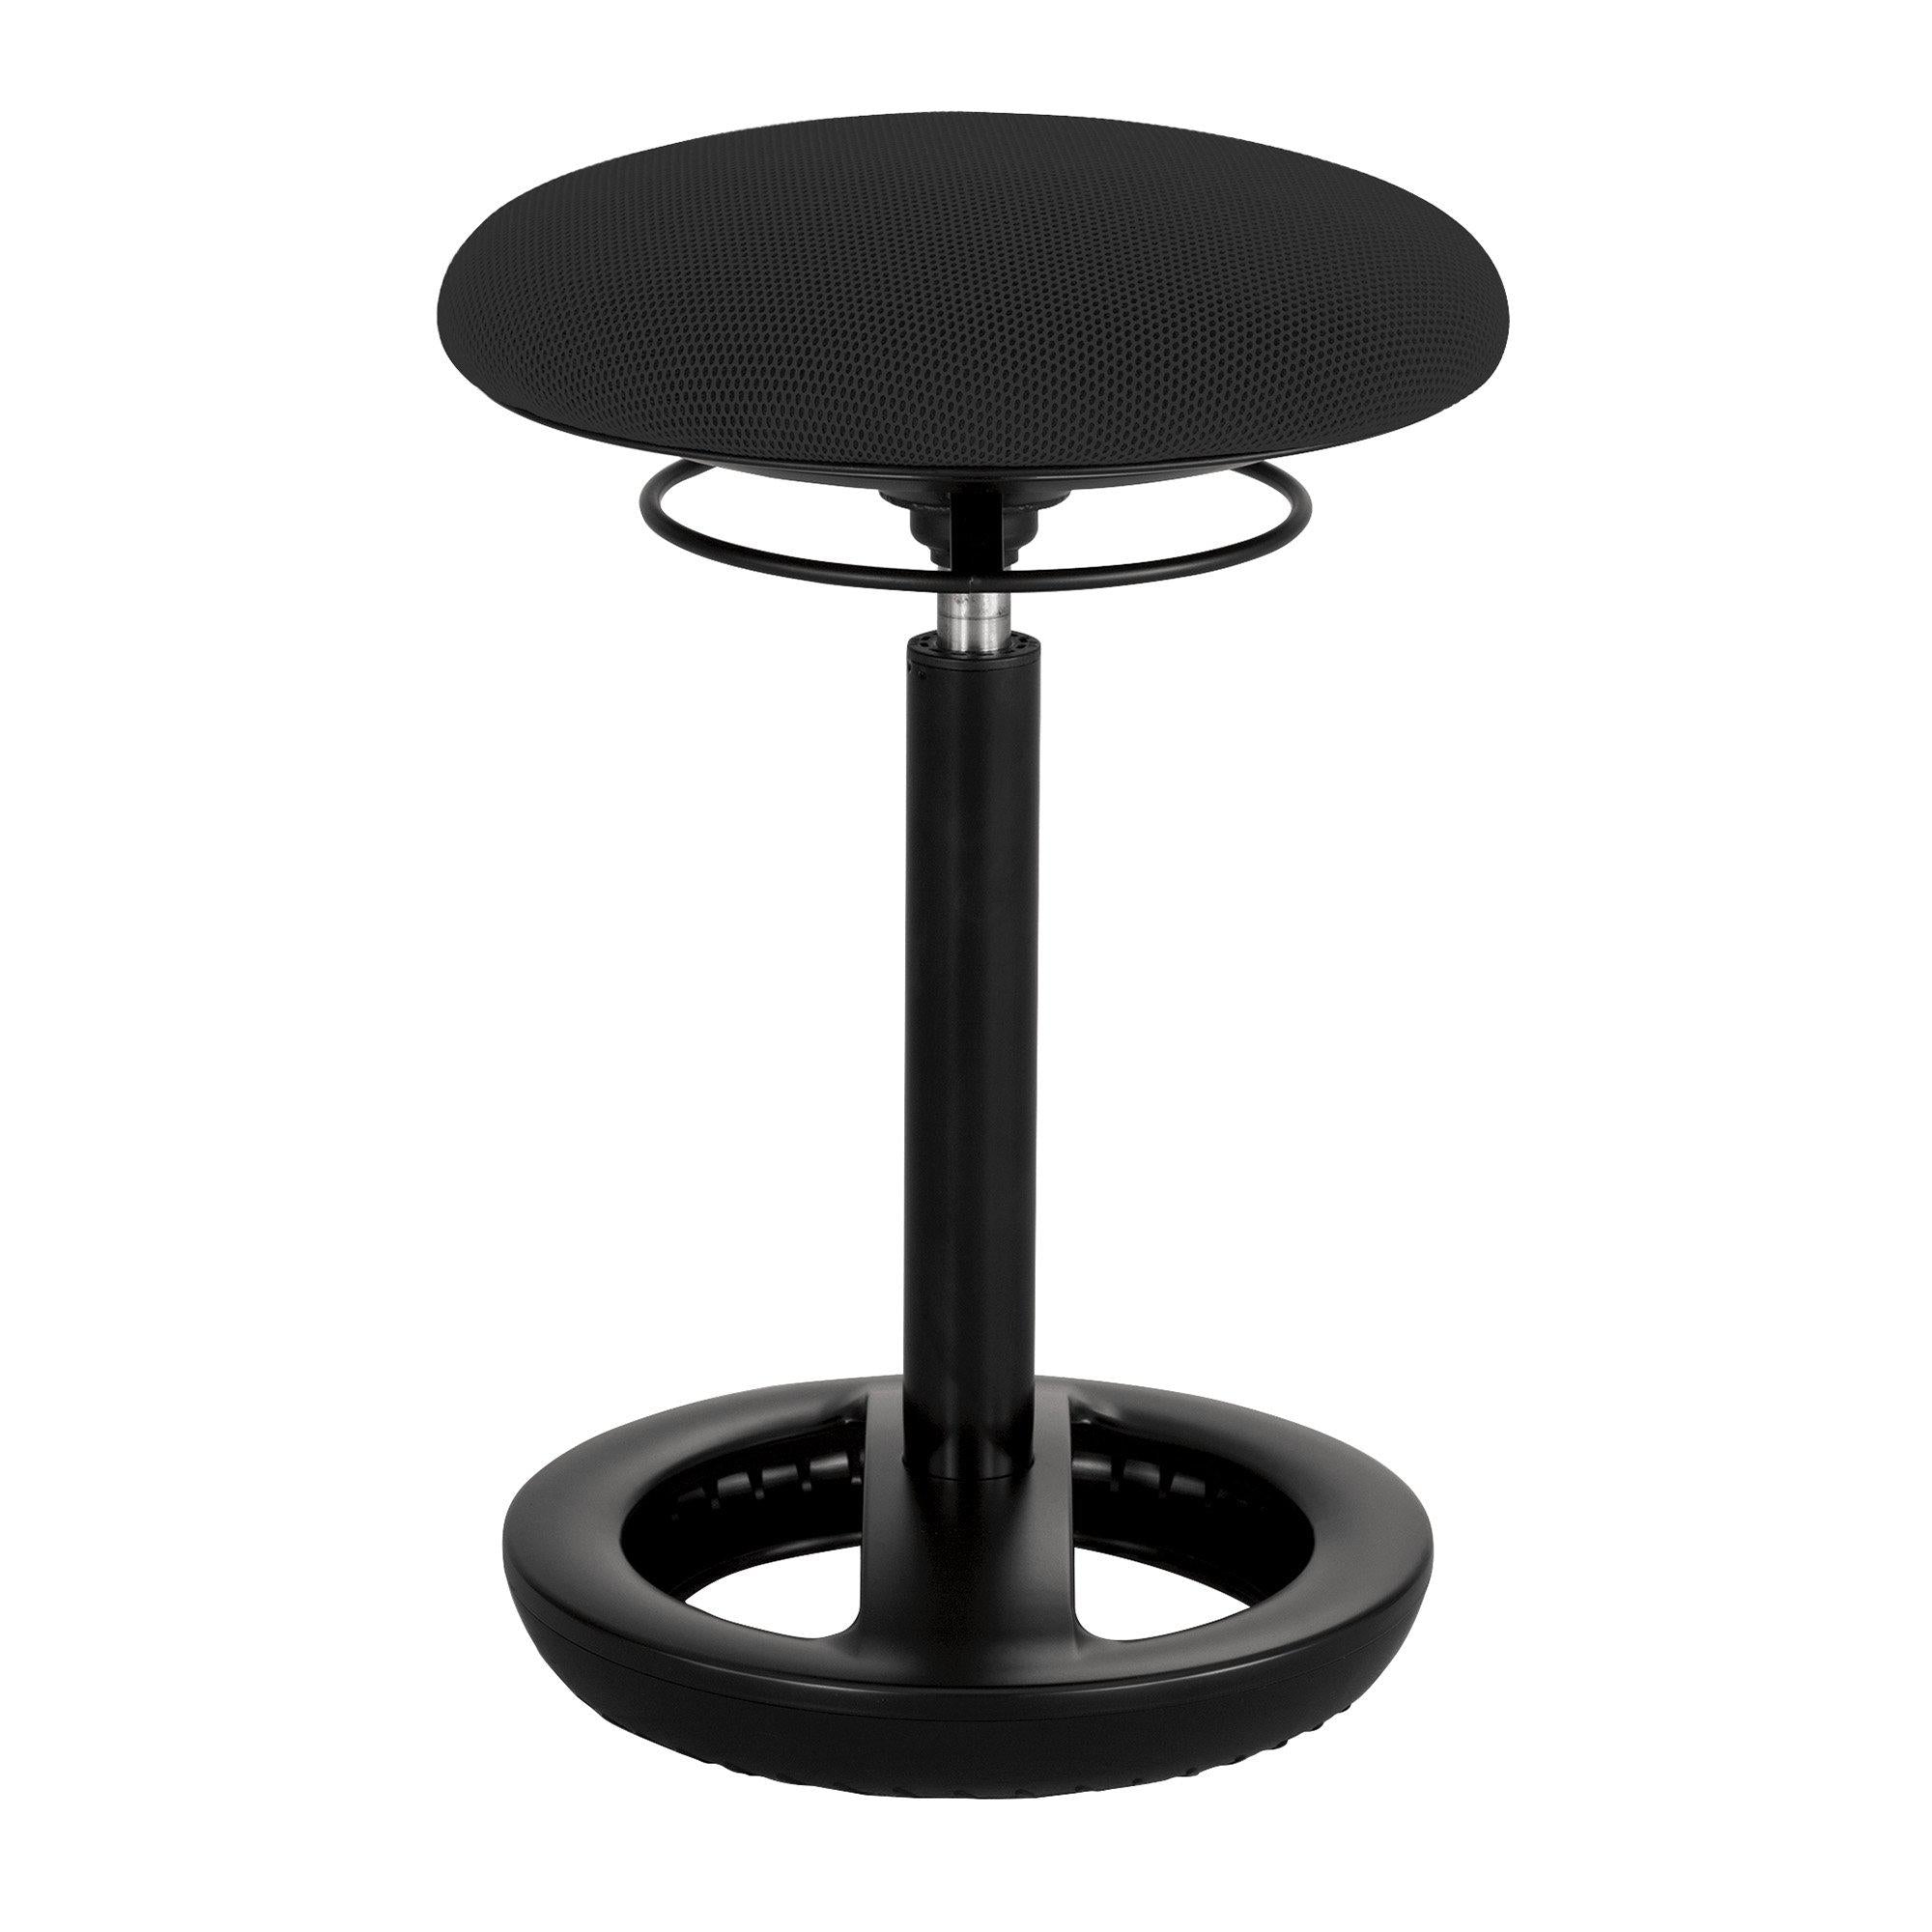 Twixt® Active Seating Stool, FREE SHIPPING